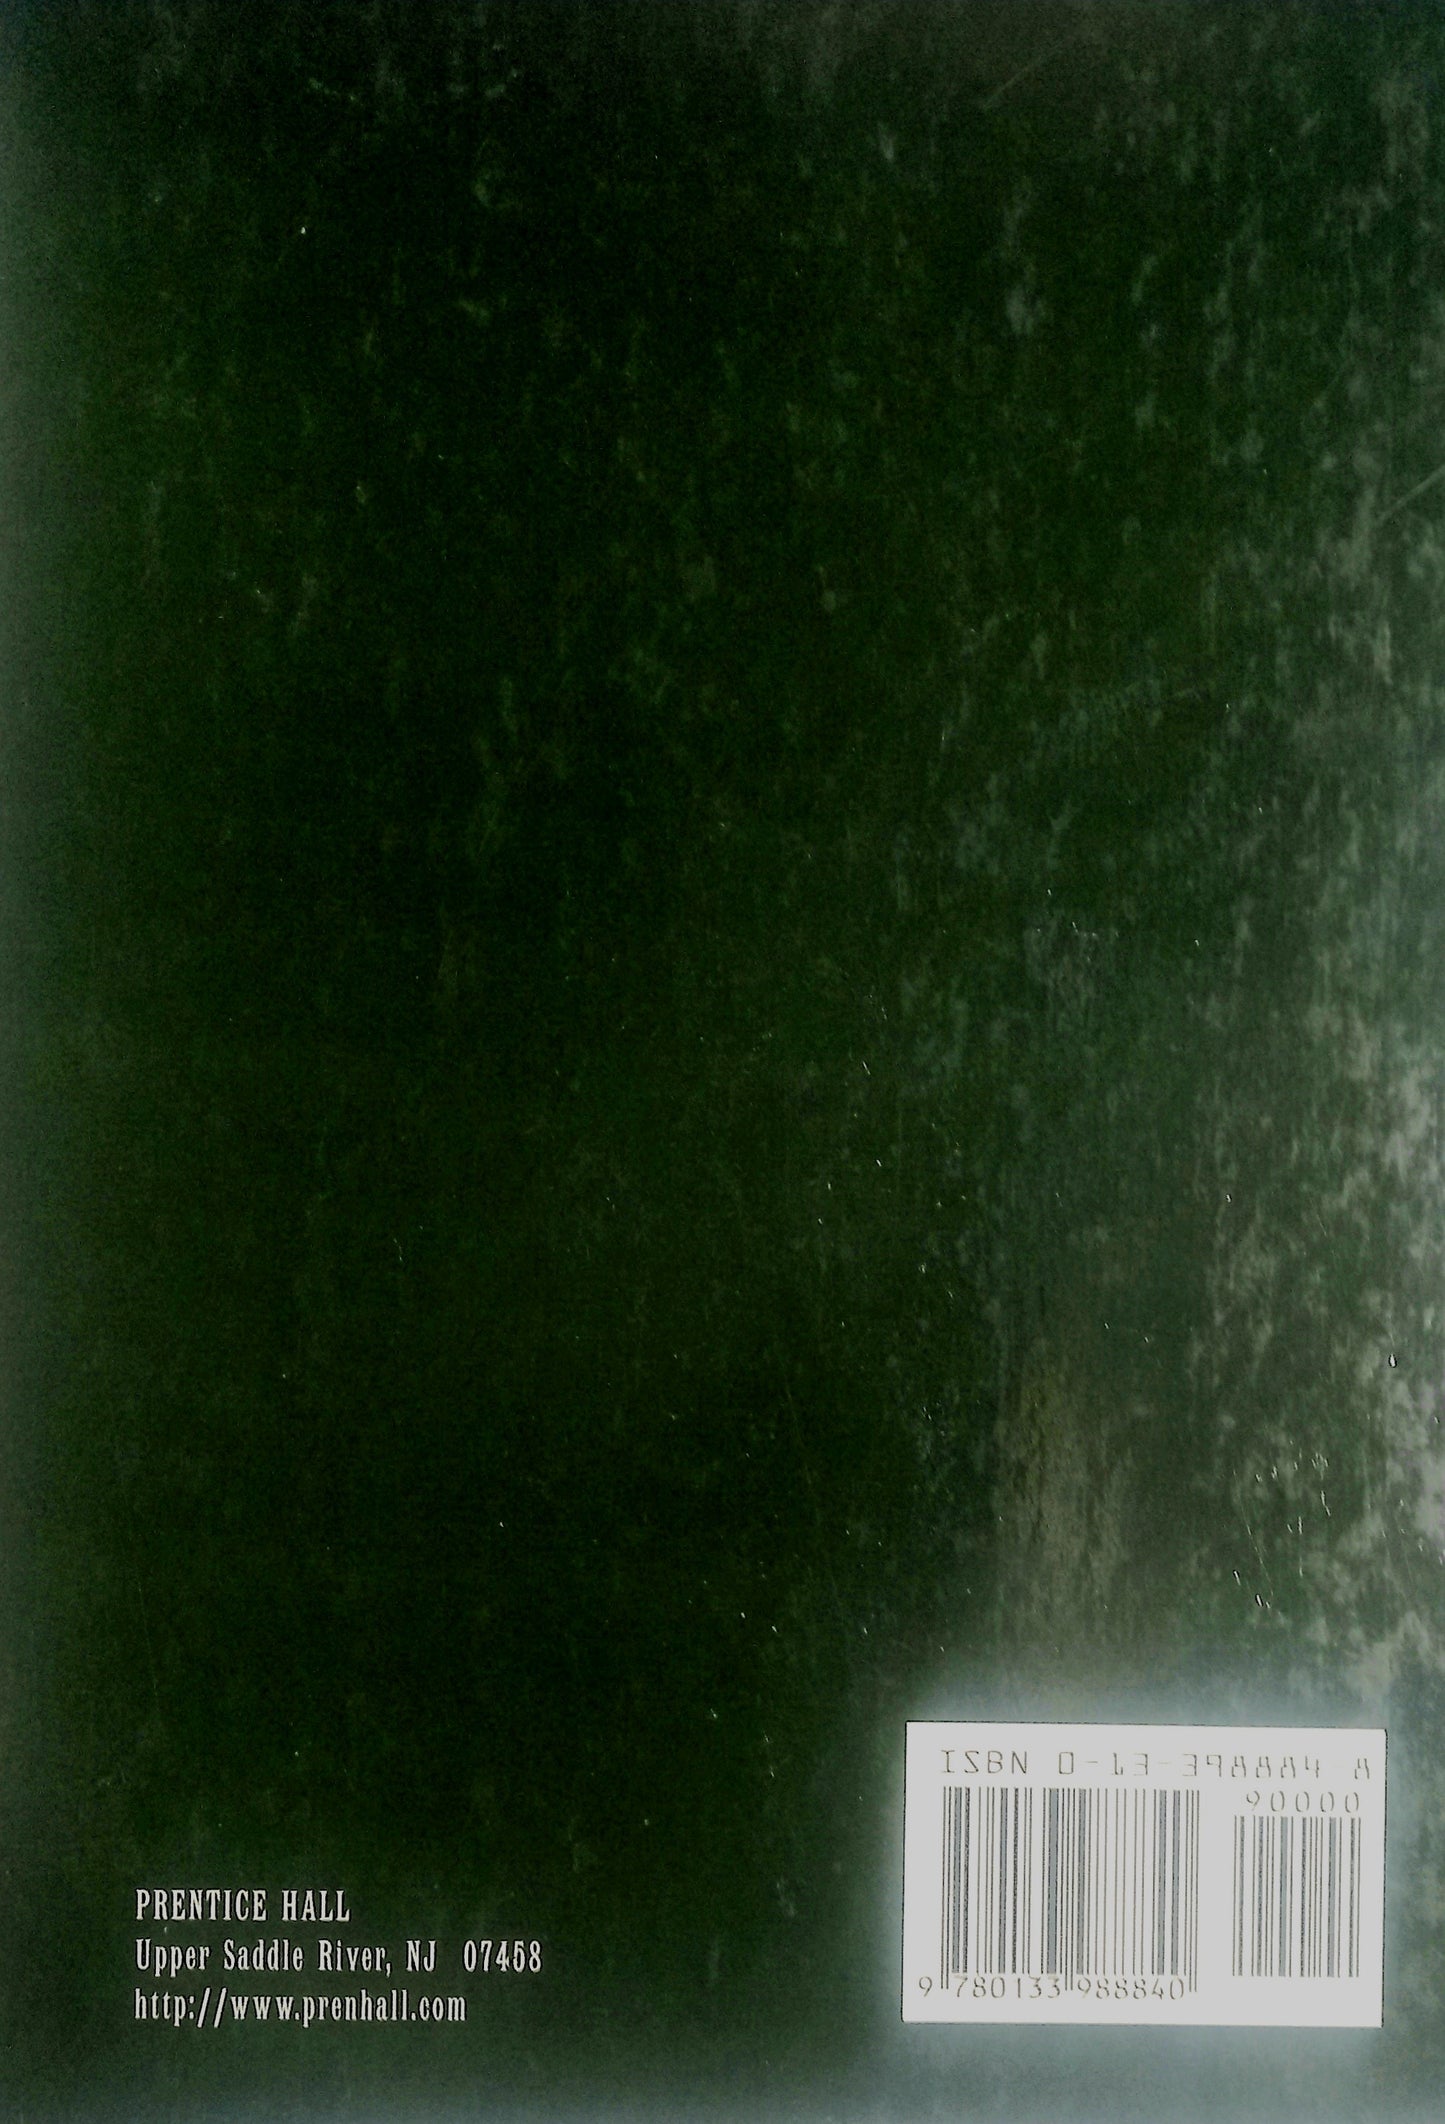 Back cover of book (Experimental Psychology Methods of Research Methods of Research, Edition: 7) showing publisher information and barcode.